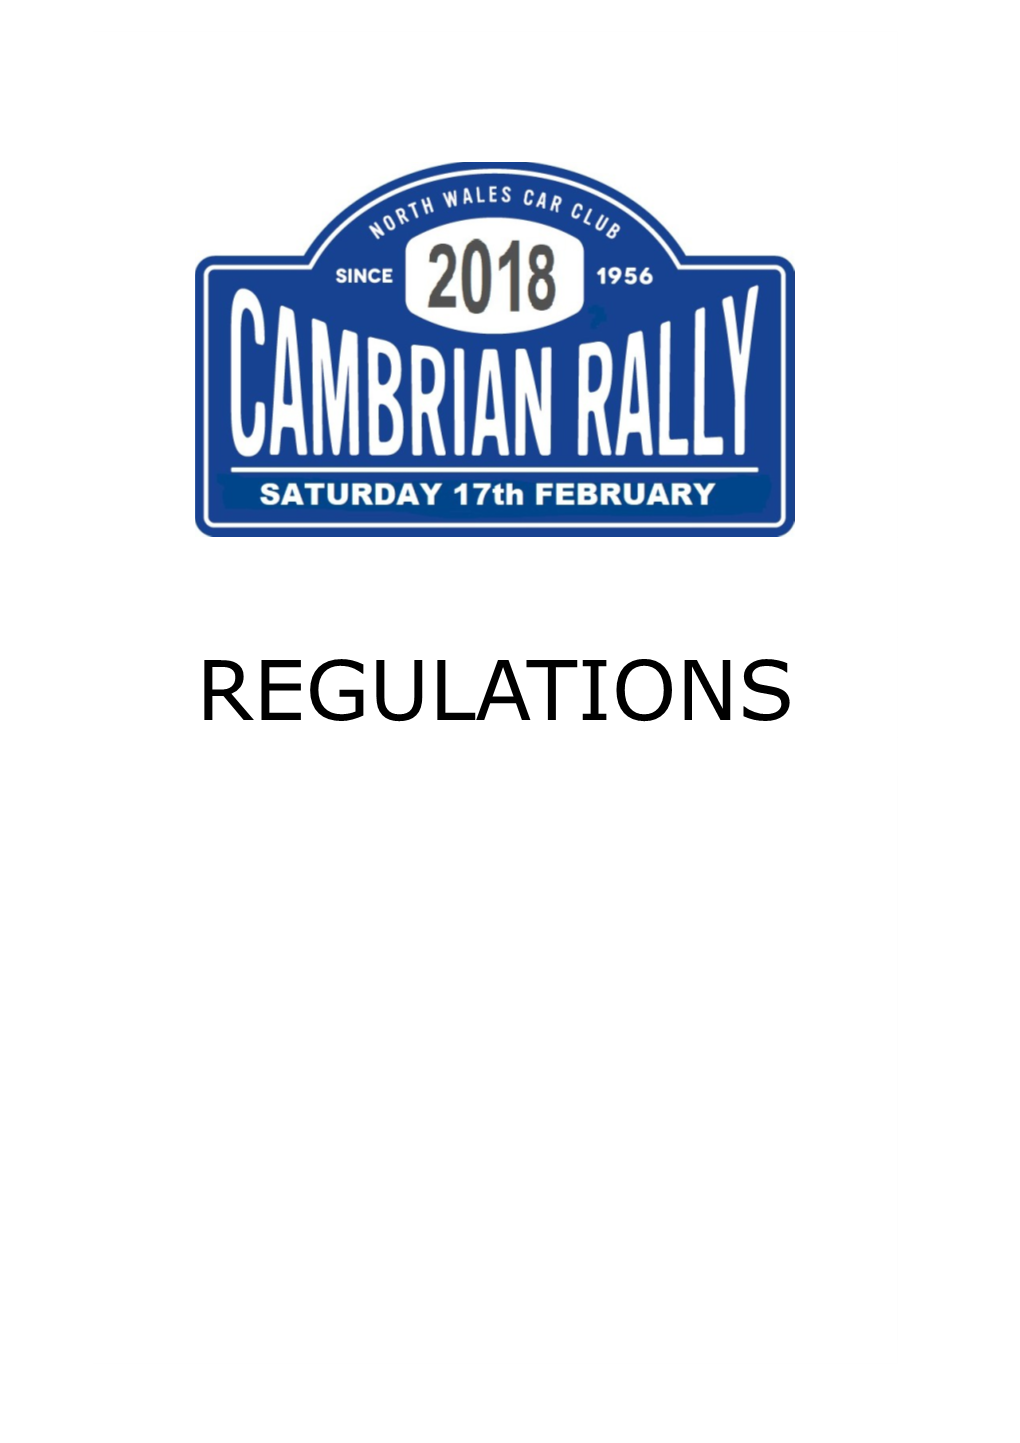 Welcome to the 2018 and 63Rd Cambrian Rally Organised by the North Wales Car Club. We Believe